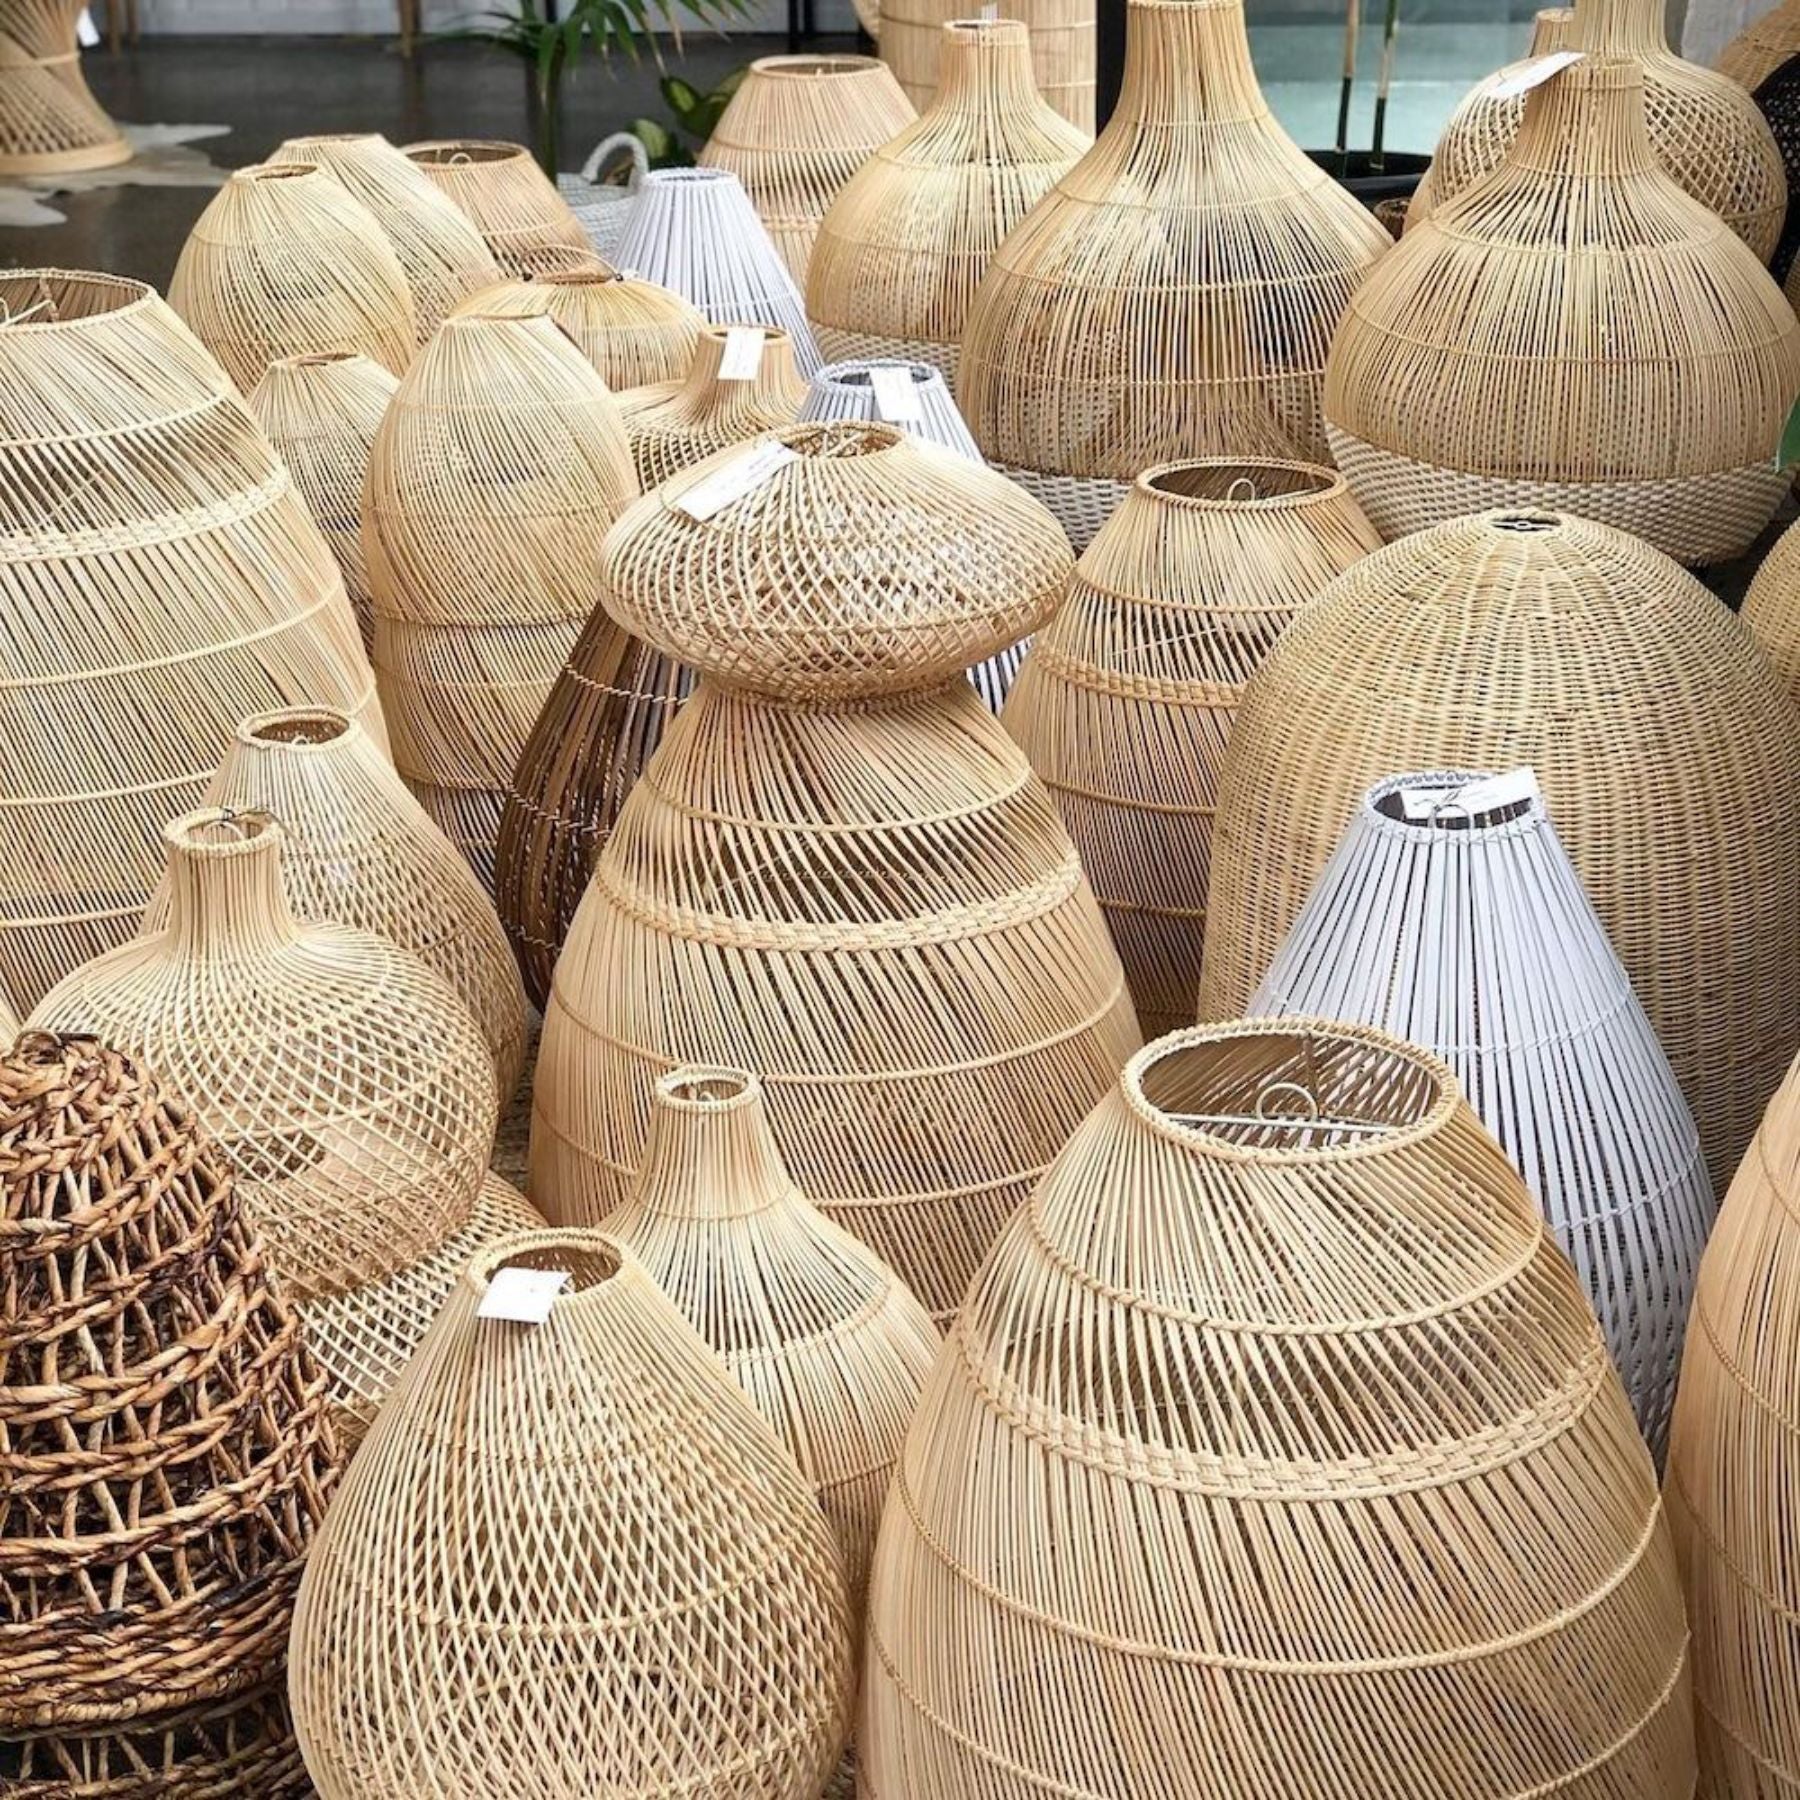 rattan is an environmentally friendly choice that aligns with environmentally conscious values